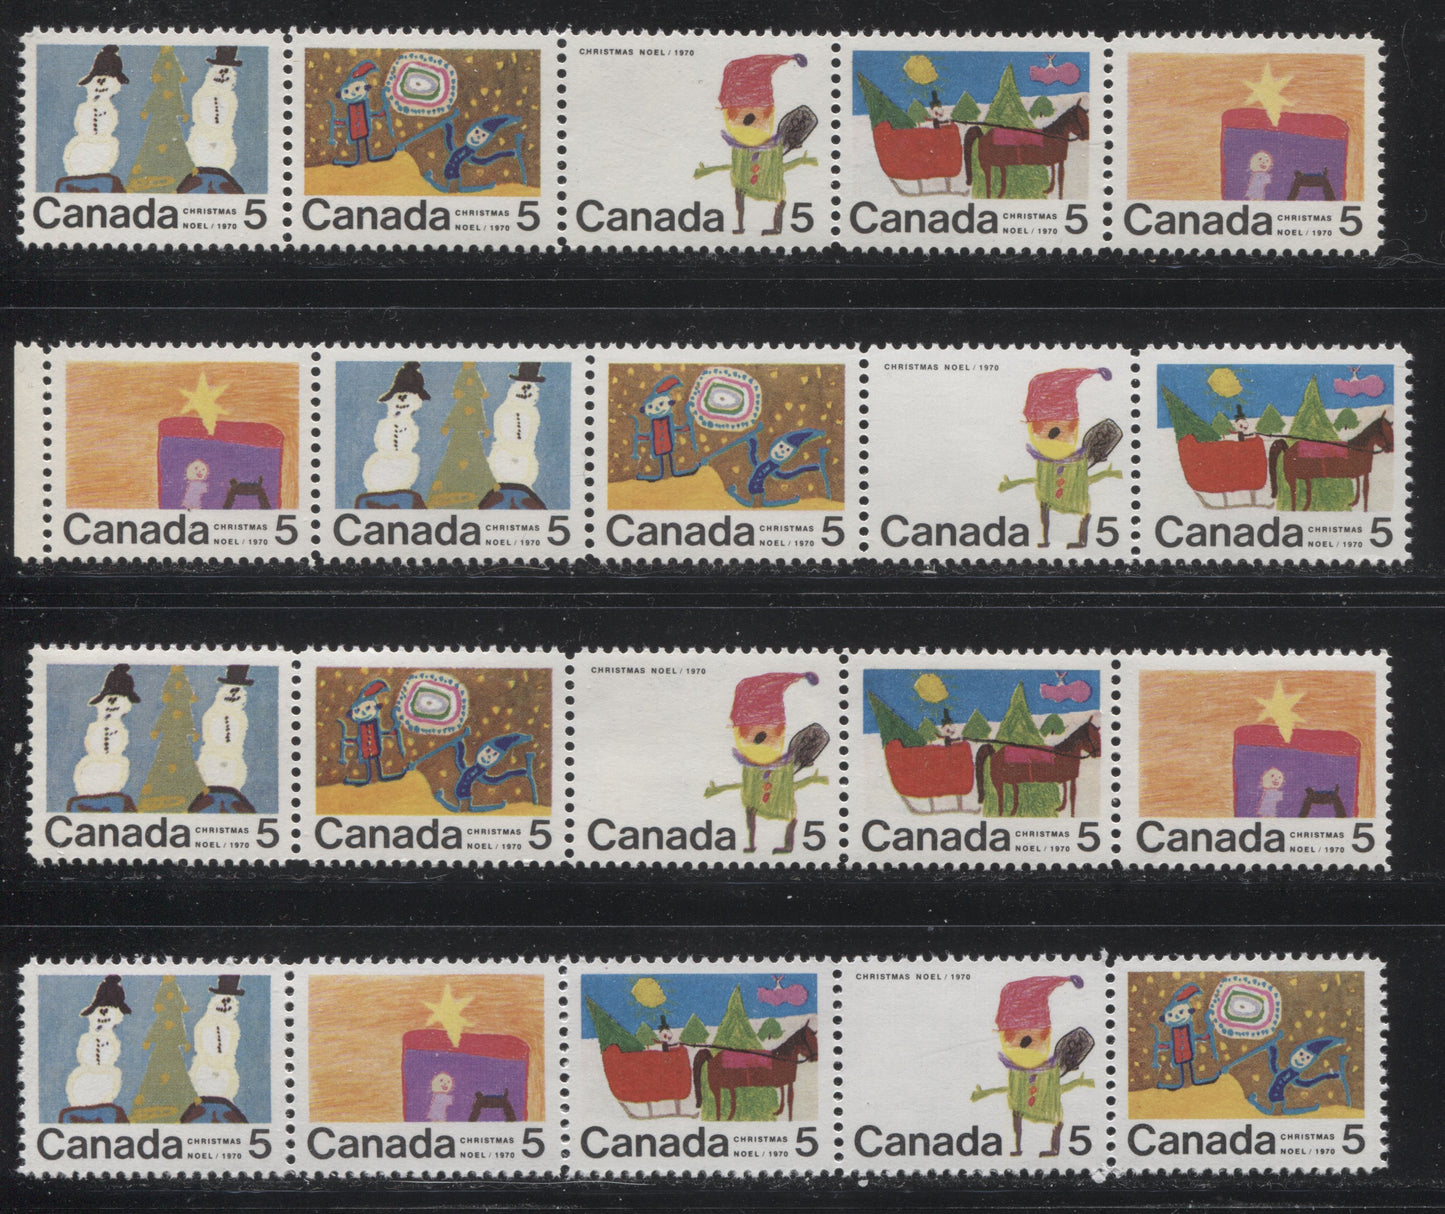 Lot 106 Canada #519-523 5c Multicoloured 1970 Christmas Issue, Four VFNH Se-Tenant Horizontal Strips of 5 on Smooth HB11, Ribbed HB11 and HB12 Papers, Perfs 11.9, and 11.9 x 11.95